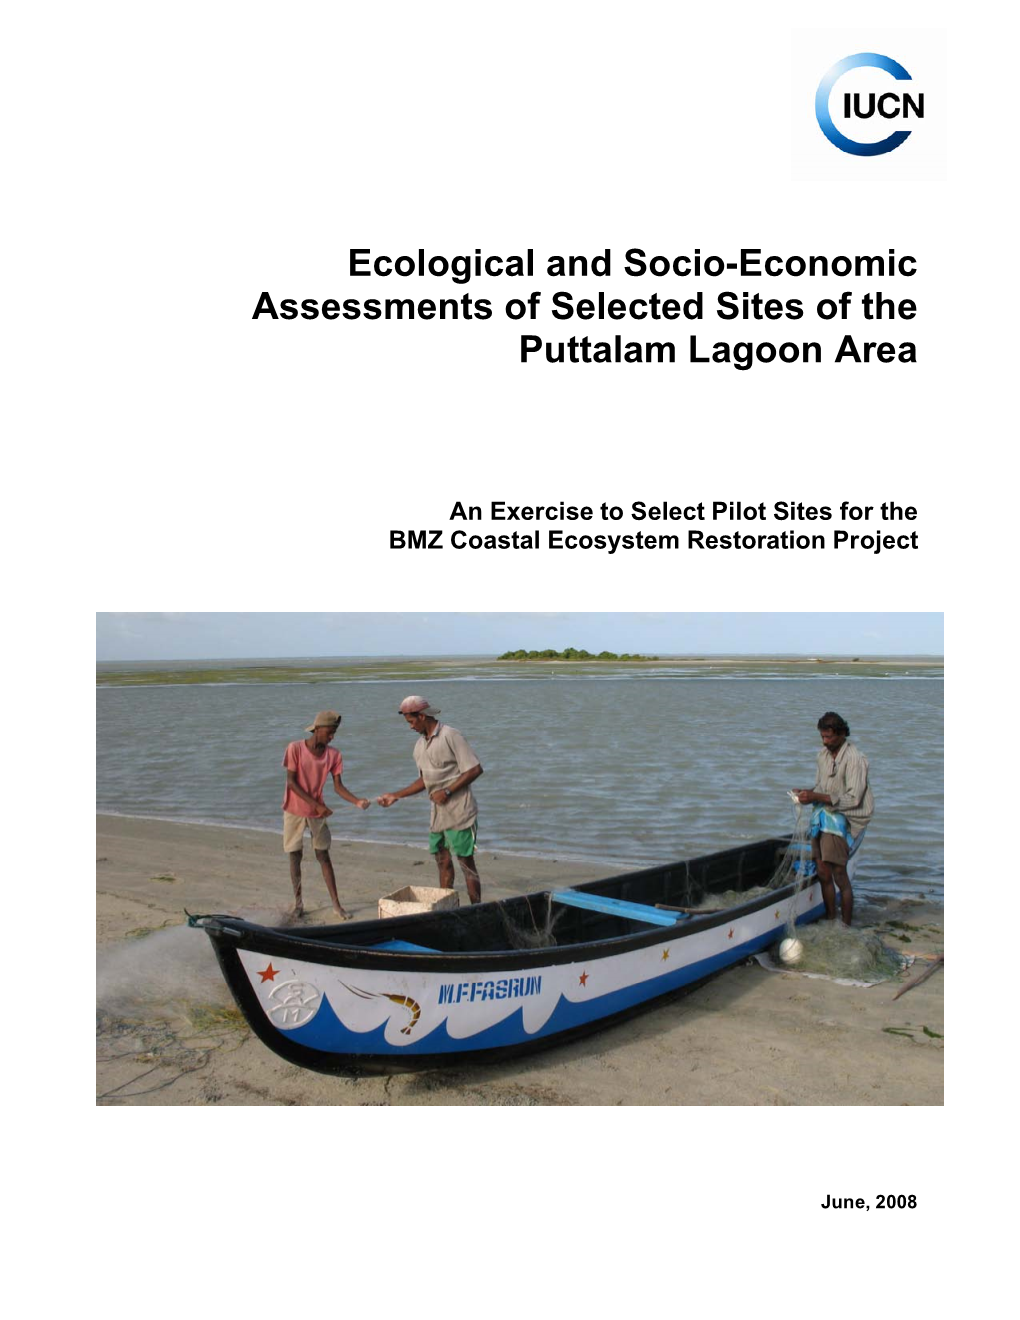 Ecological and Socio-Economic Assessments of Selected Sites of the Puttalam Lagoon Area